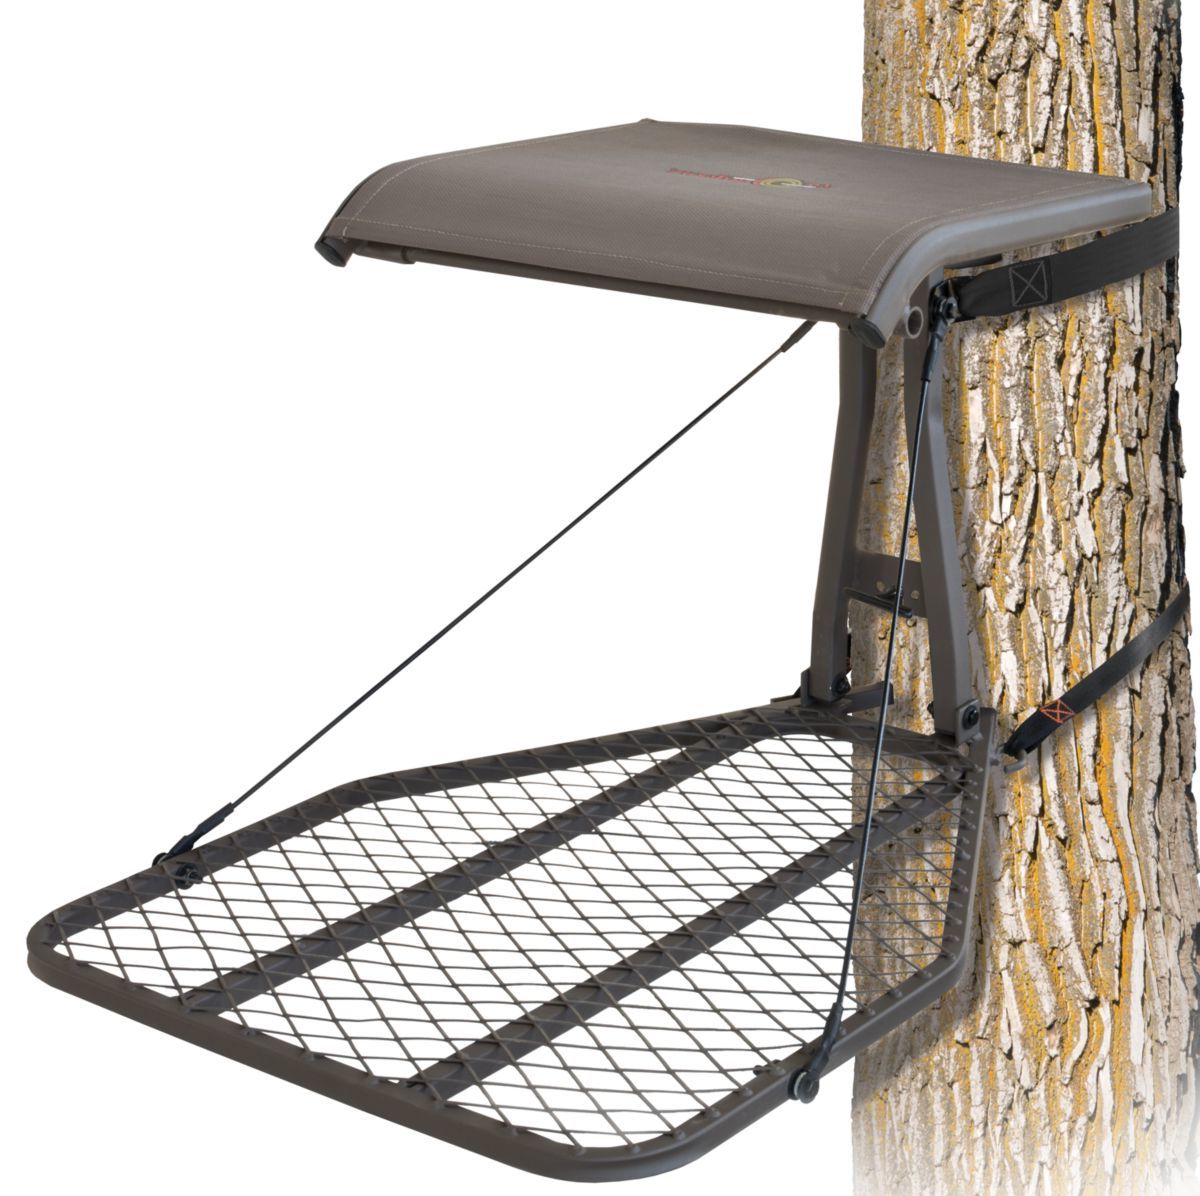 API Outdoors® Voyager Hang-On Treestand